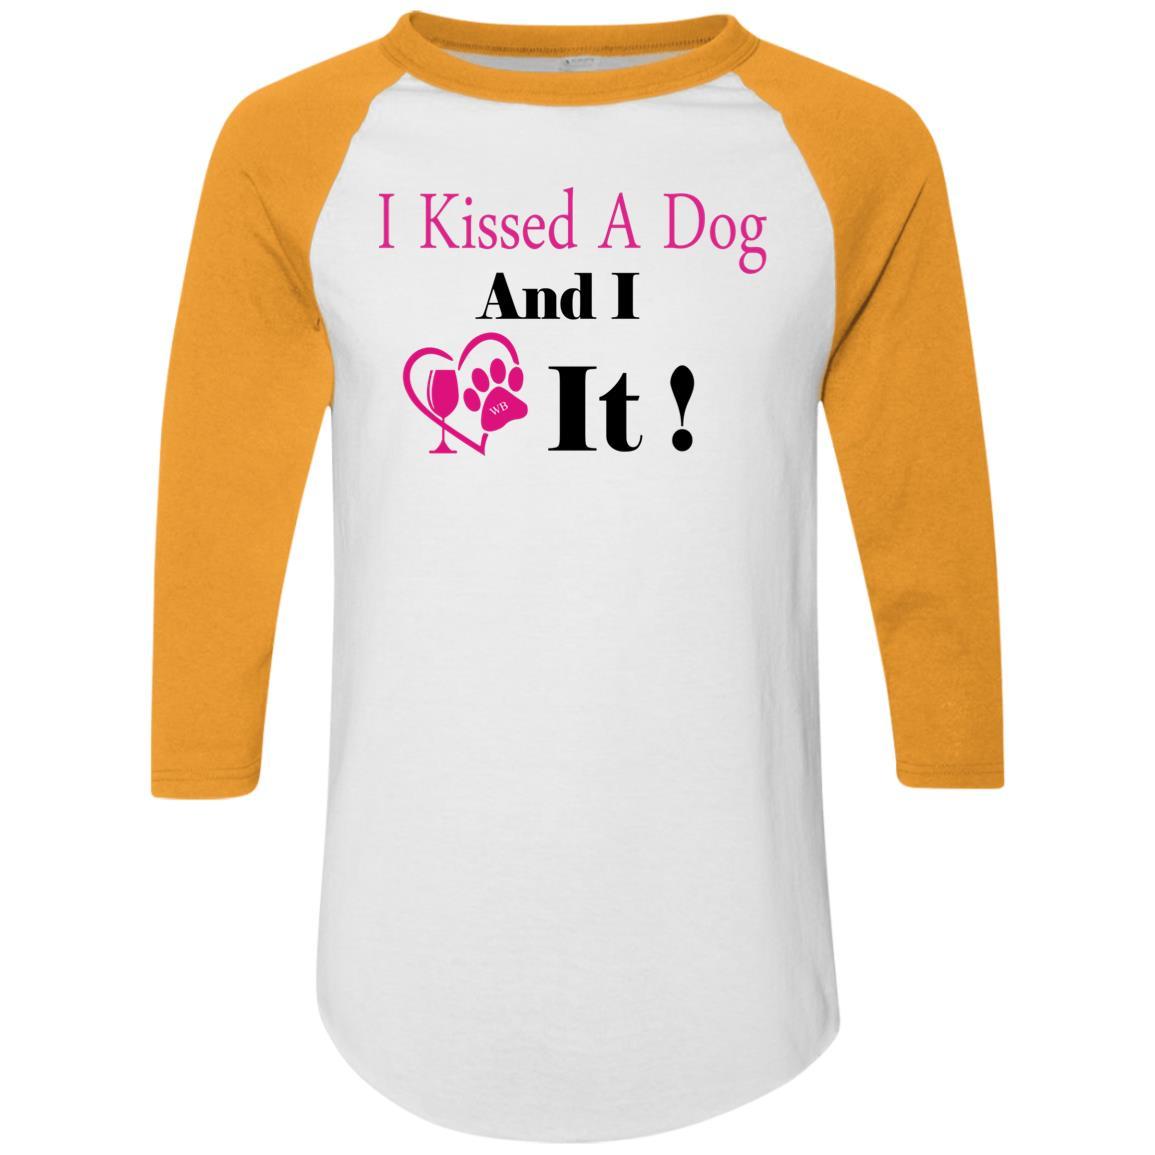 T-Shirts White/Gold / S WineyBitches.co "I Kissed A Dog And I Loved It:" Colorblock Raglan Jersey WineyBitchesCo